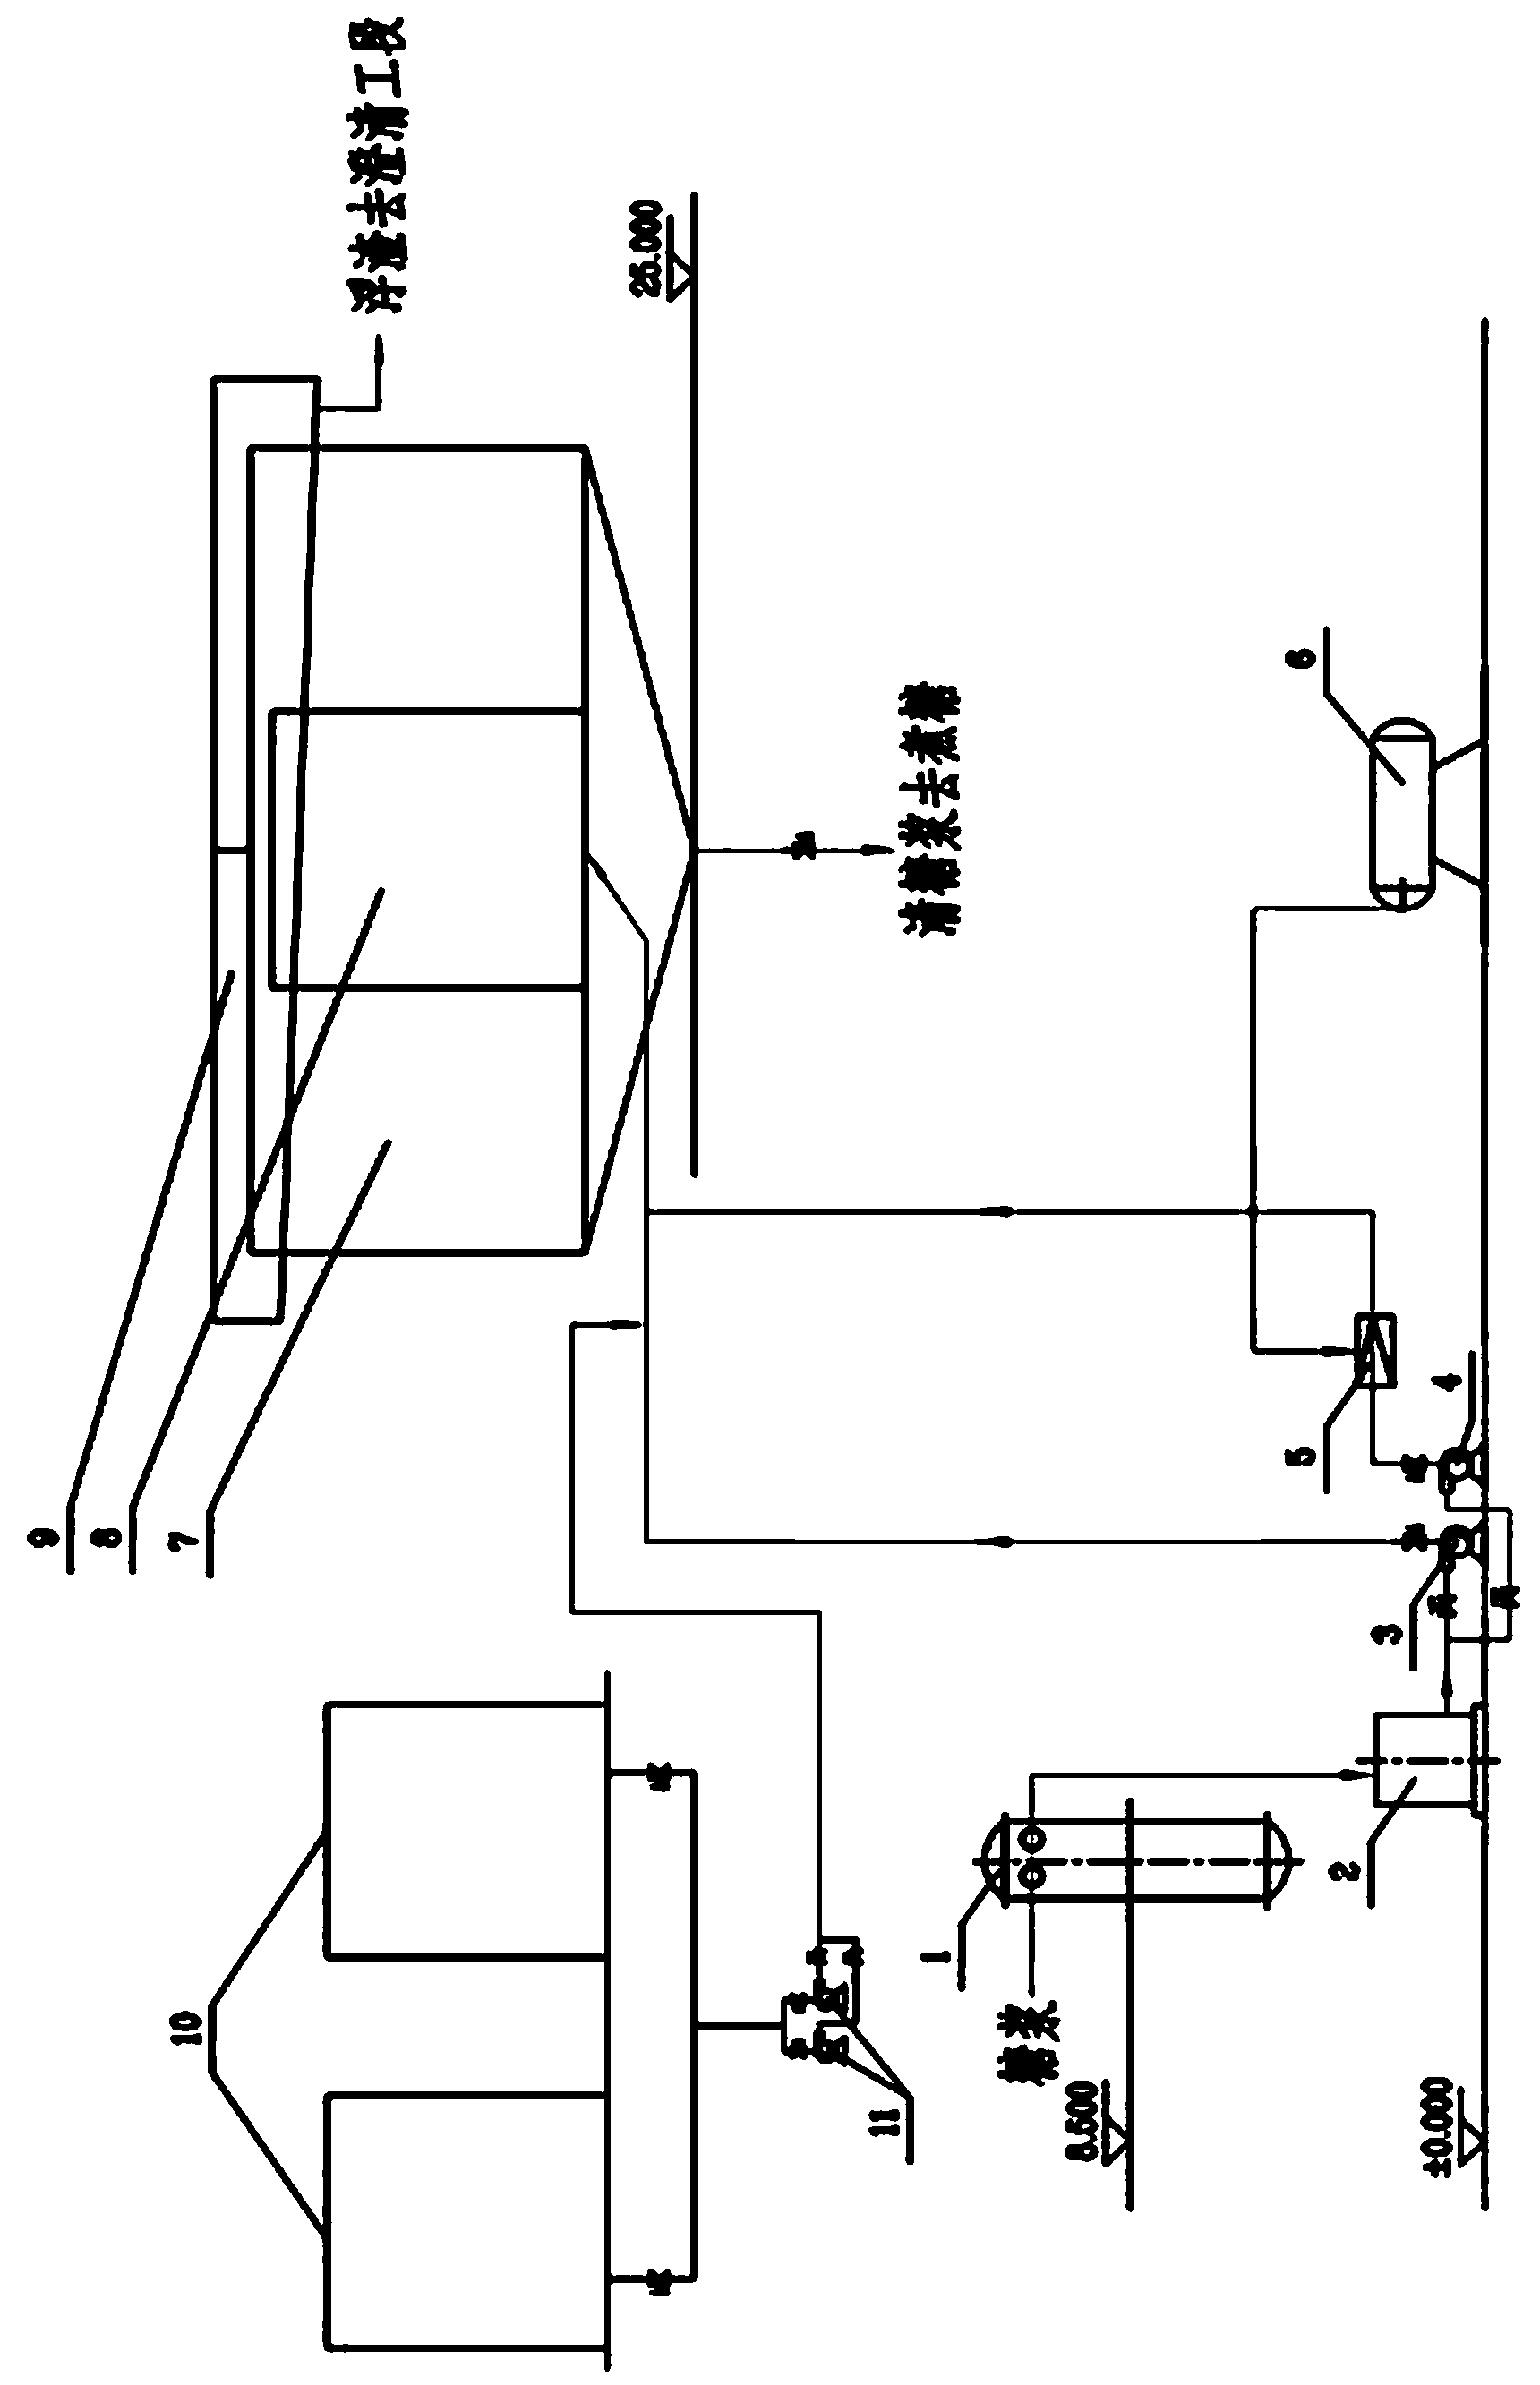 Method for automatically clearing syrup in conveying and storing processes